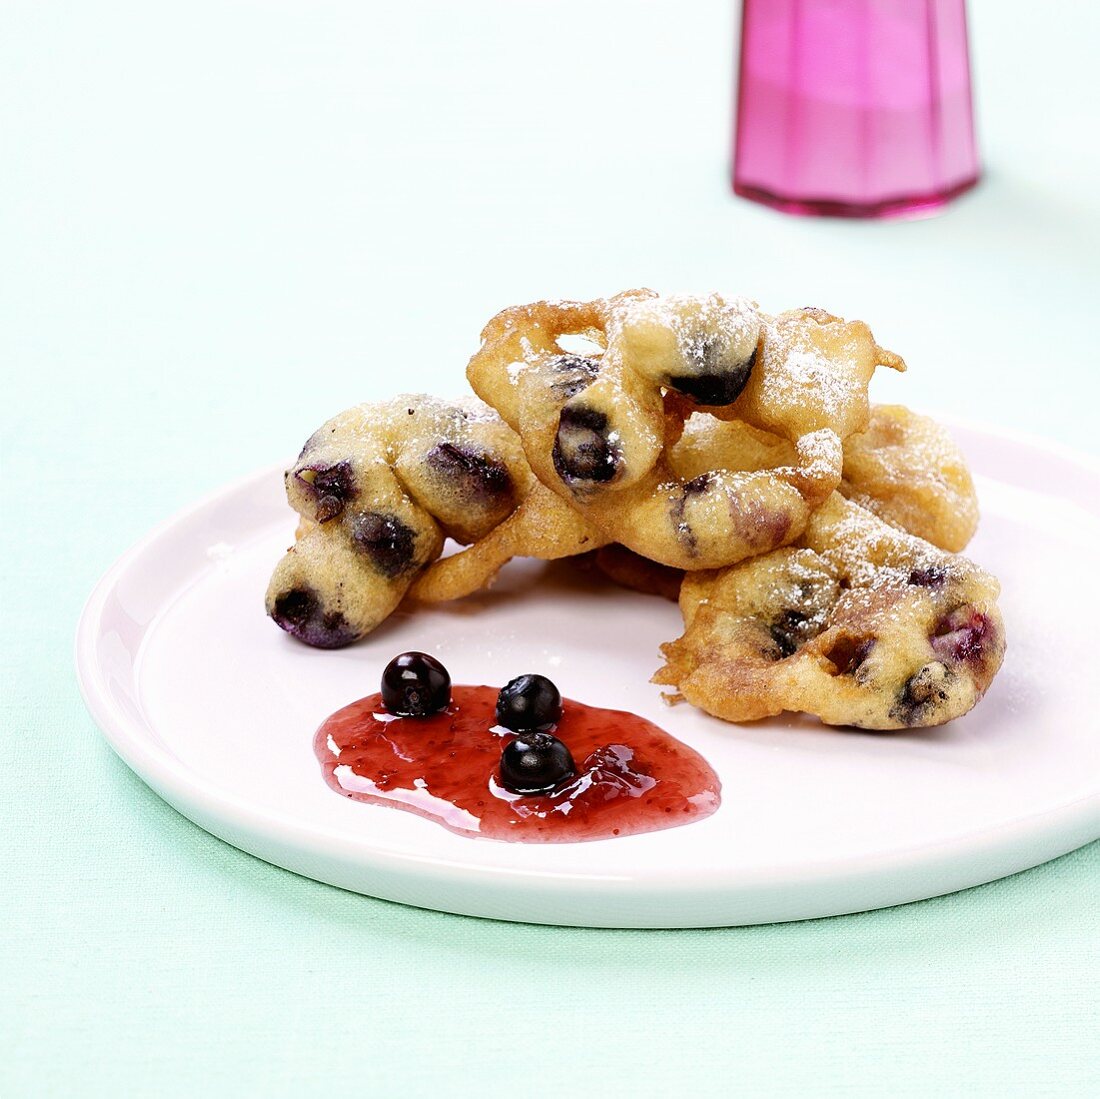 Deep-fried pastries with blueberries